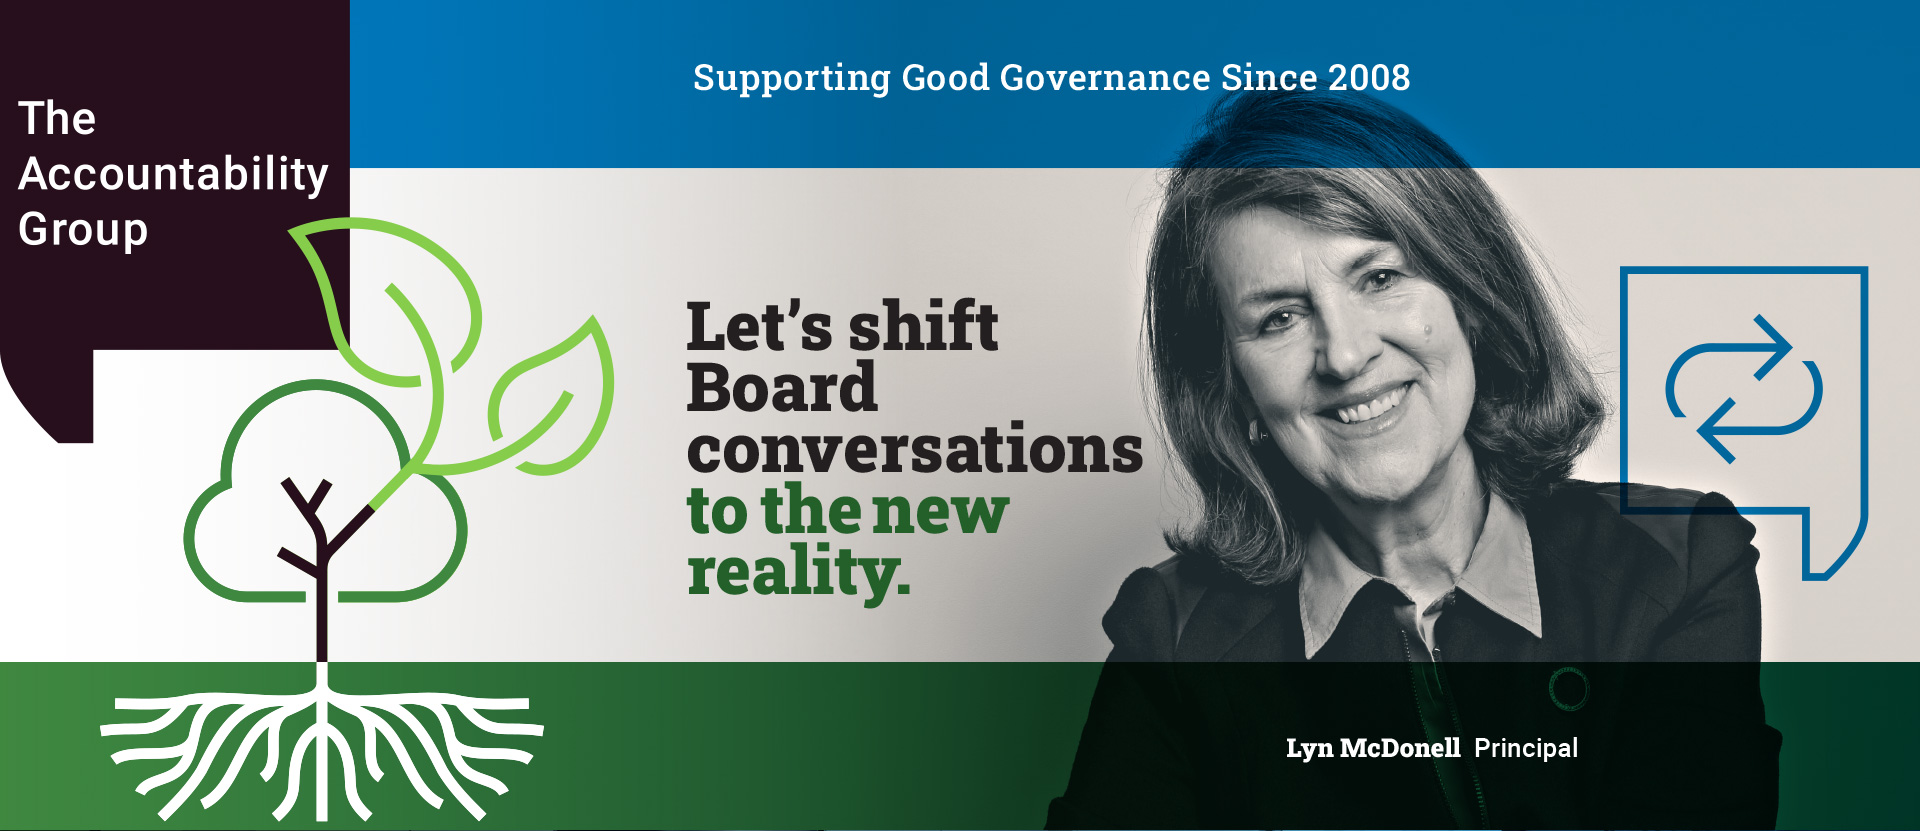 The Accountability Group: Let’s shift Board conversations to the new reality.